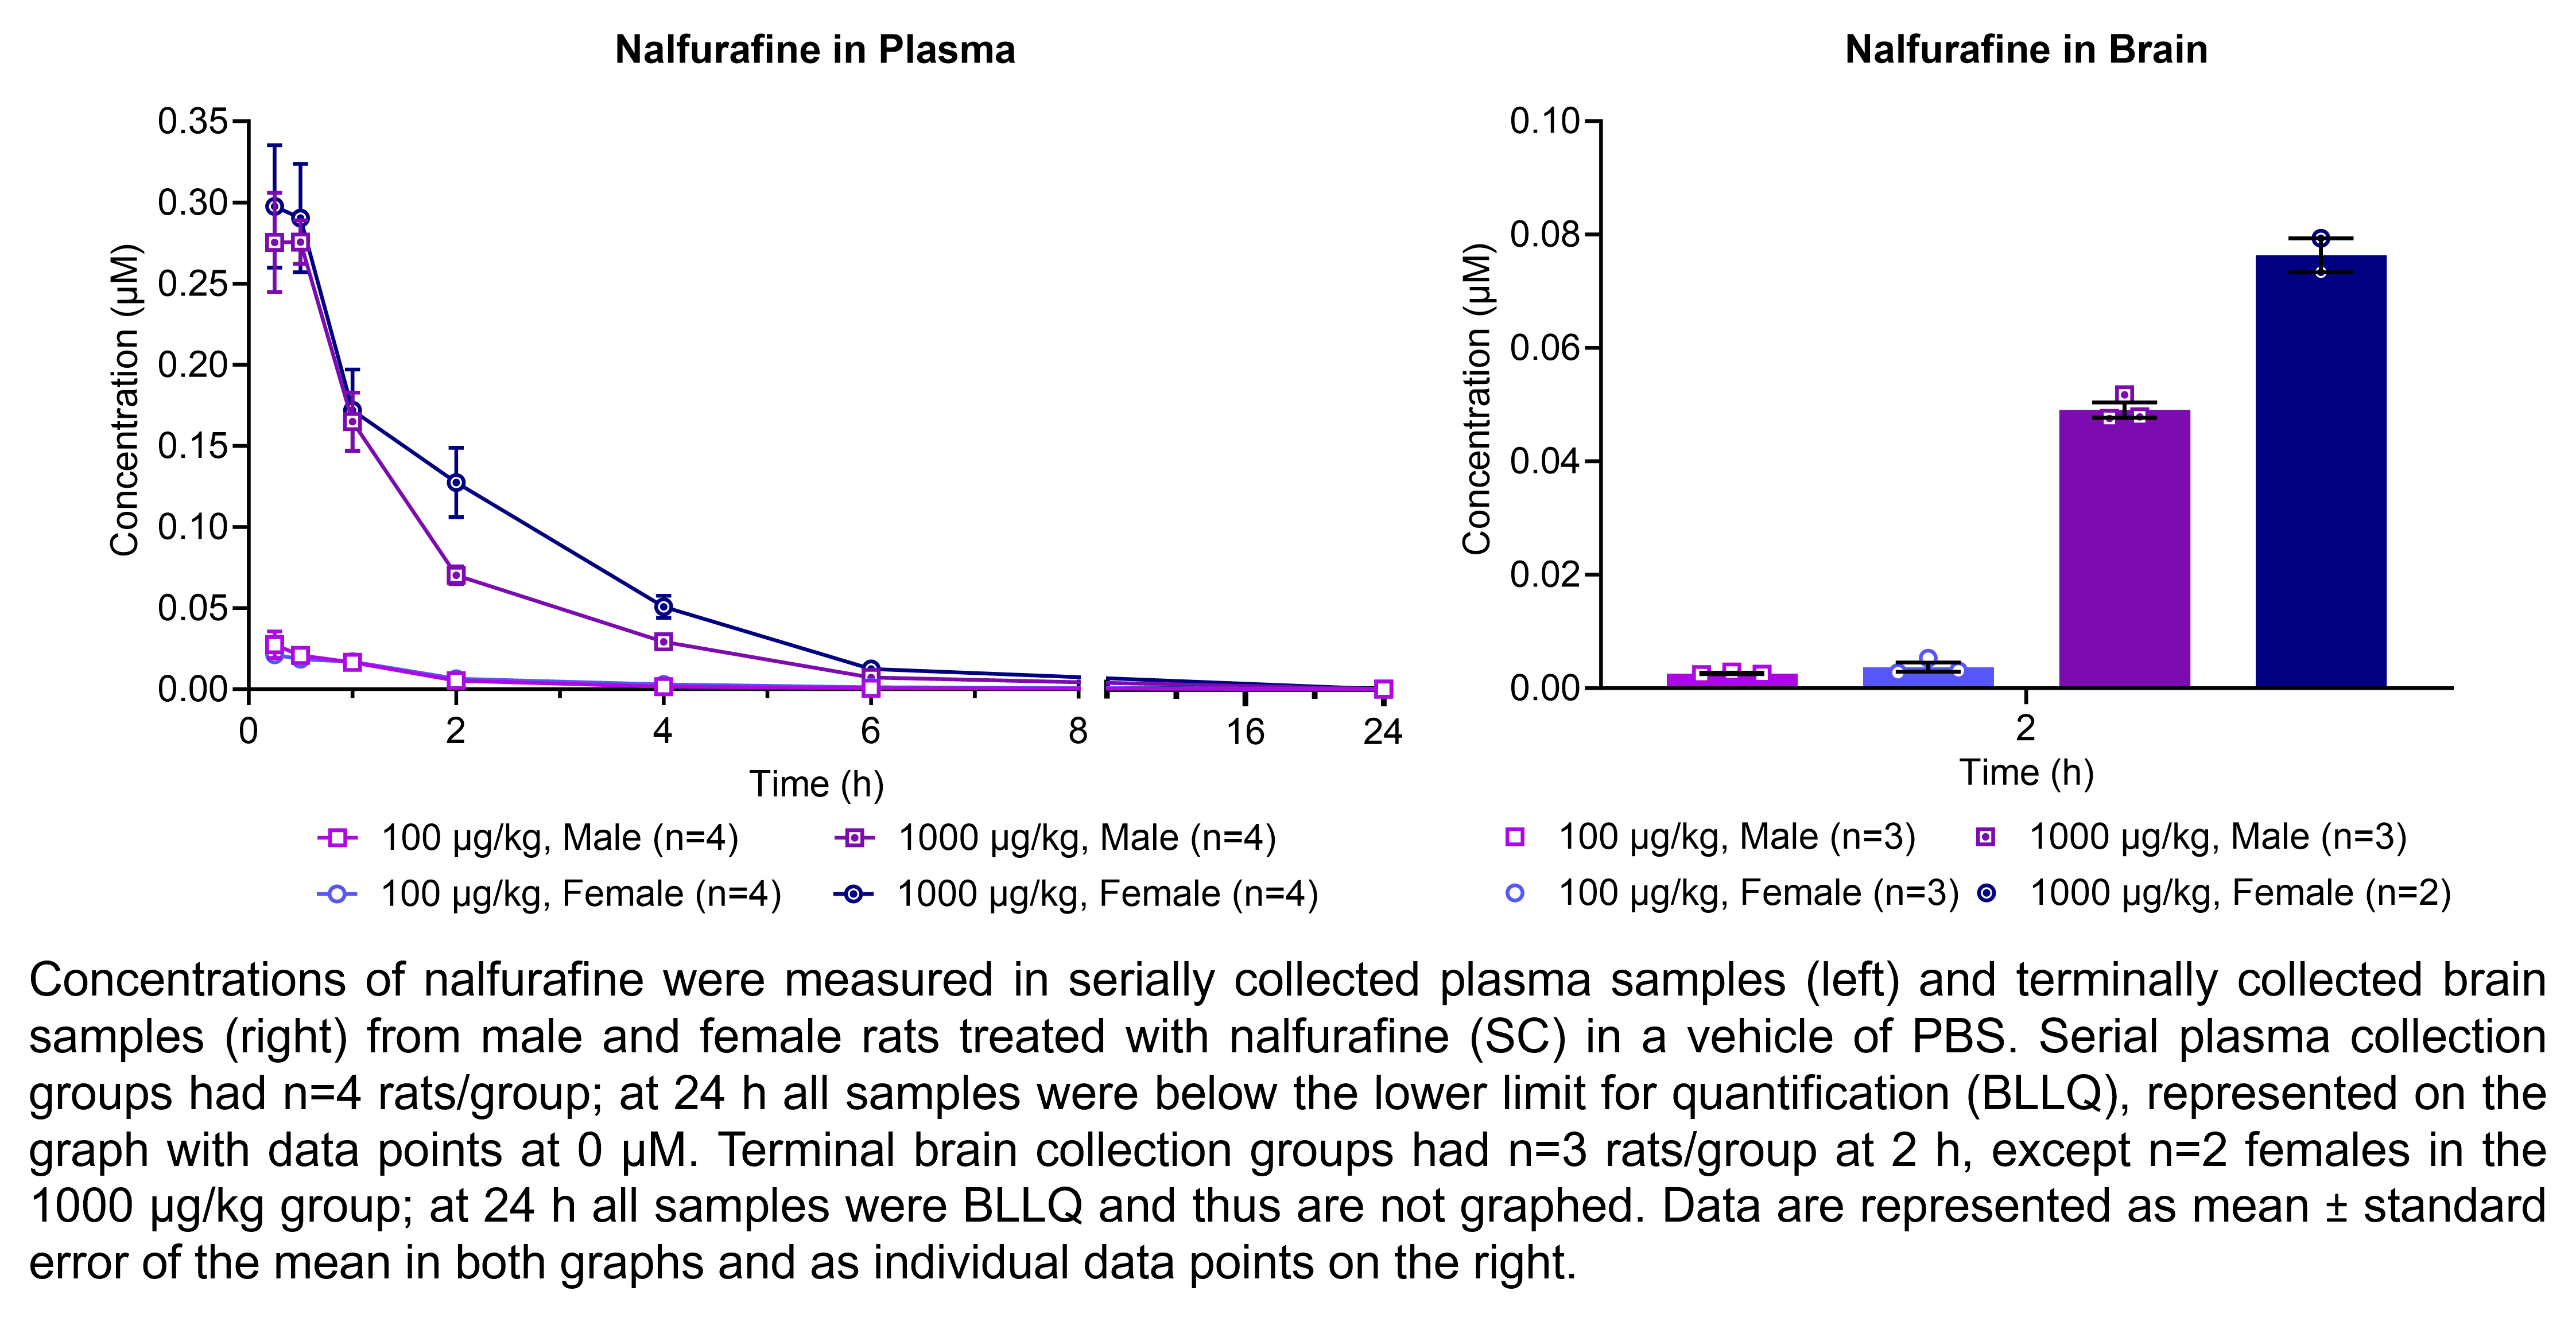 Nalfurafine concentrations were measured in serially collected plasma samples and terminally collected brain samples (shown on two graphs) from males and females treated with 100 or 1000 µg/kg nalfurafine (SC) in a vehicle of PBS. There were 4 rats/group for plasma and 2-3 rats/group for brain.